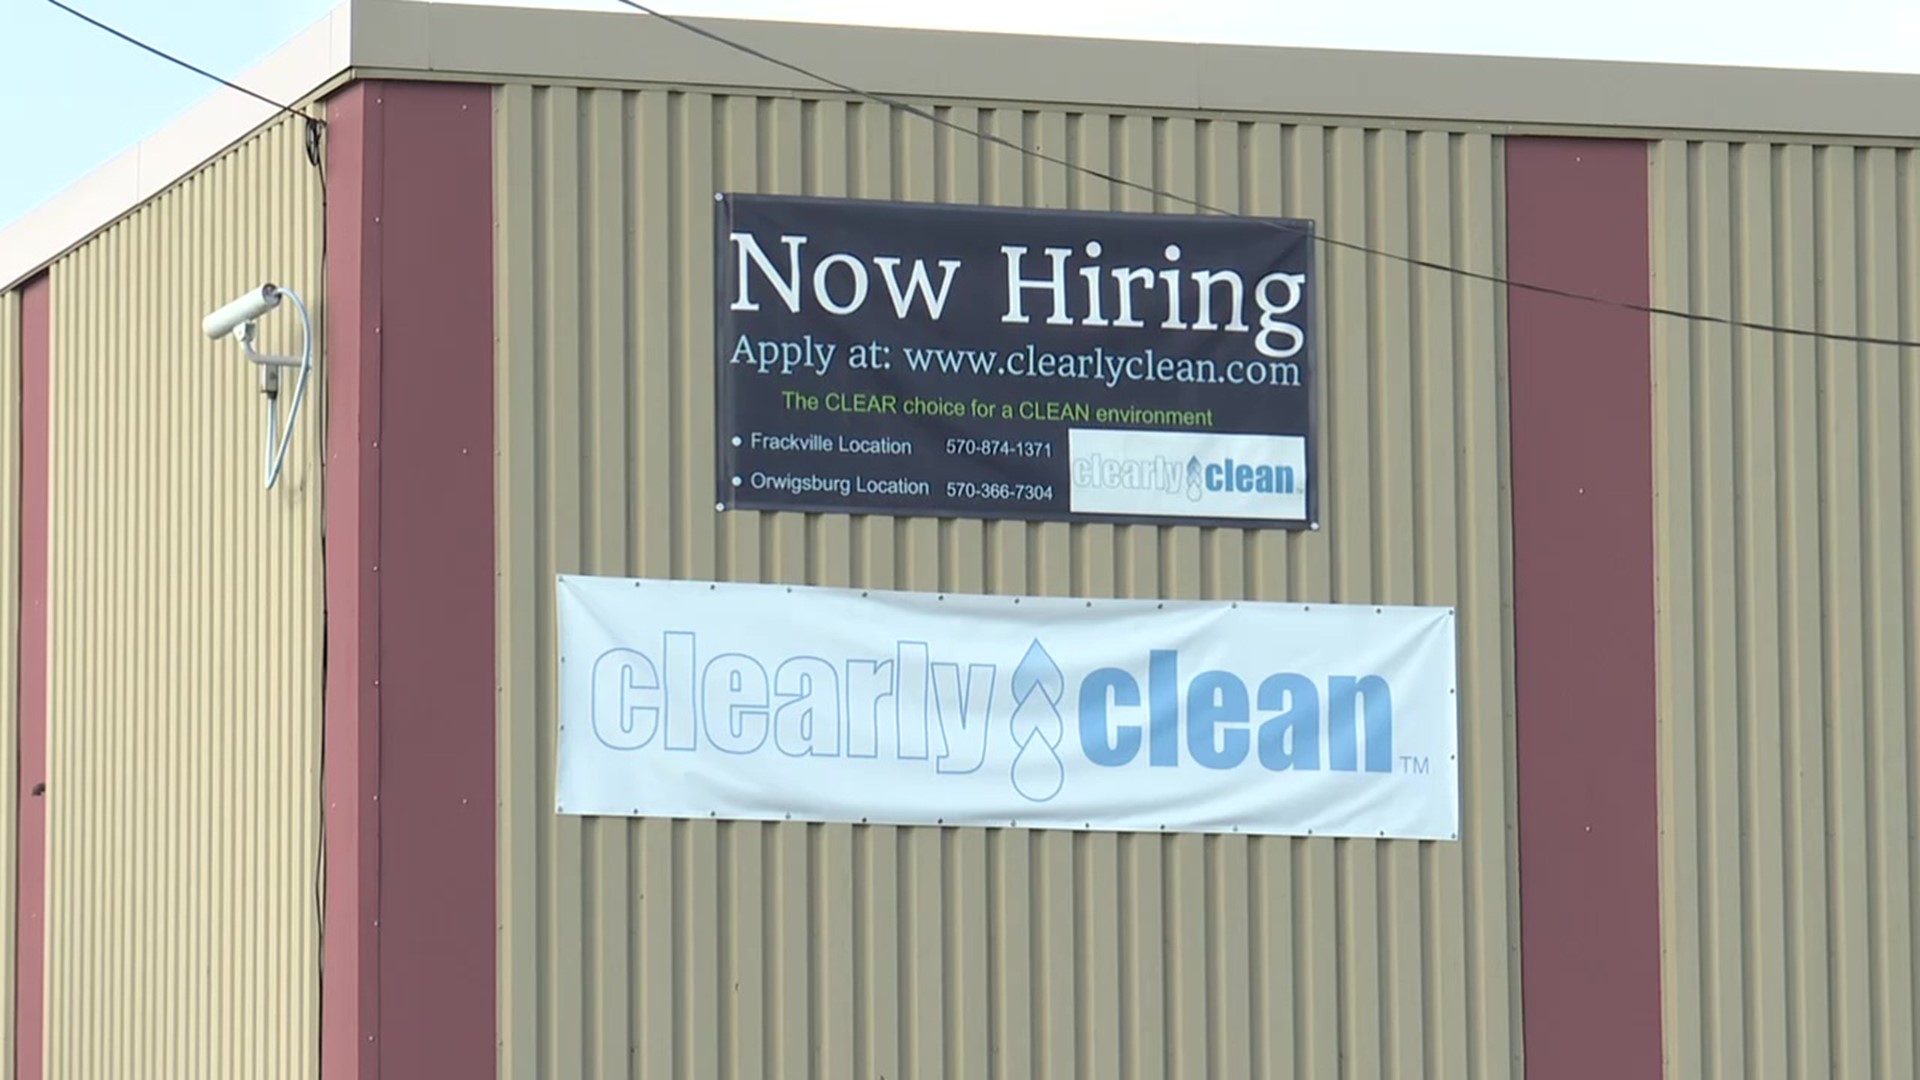 Clearly Clean LLC makes 100 percent recyclable food trays and is looking to add more people to its growing workforce.